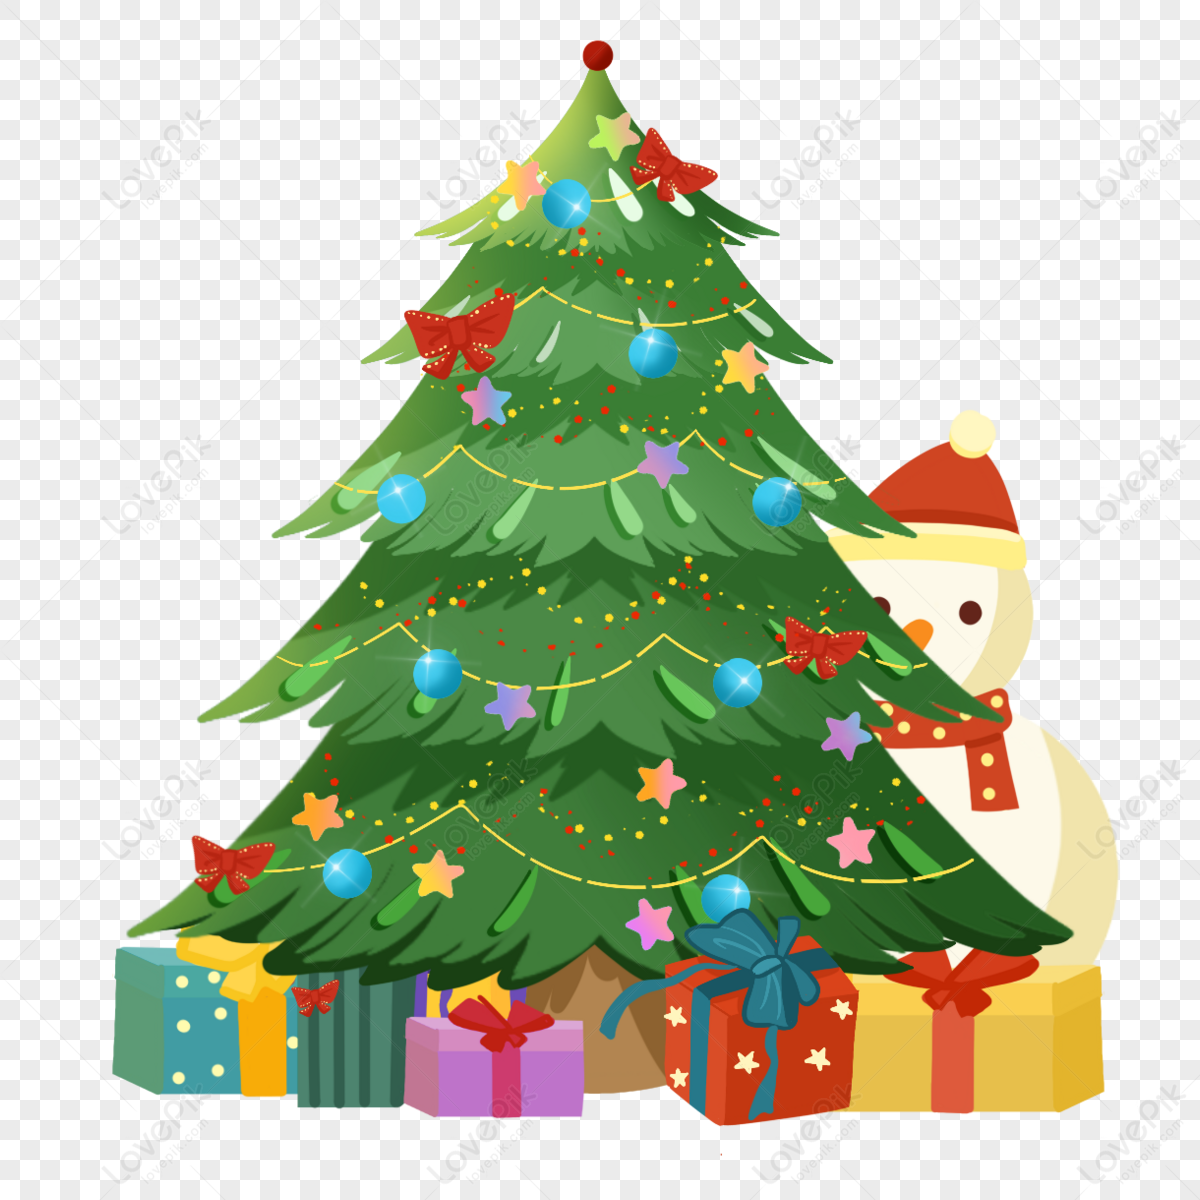 Colorful Christmas Tree Gift Box, Colorful Gift Box PNG, Snowman Hd PNG ...